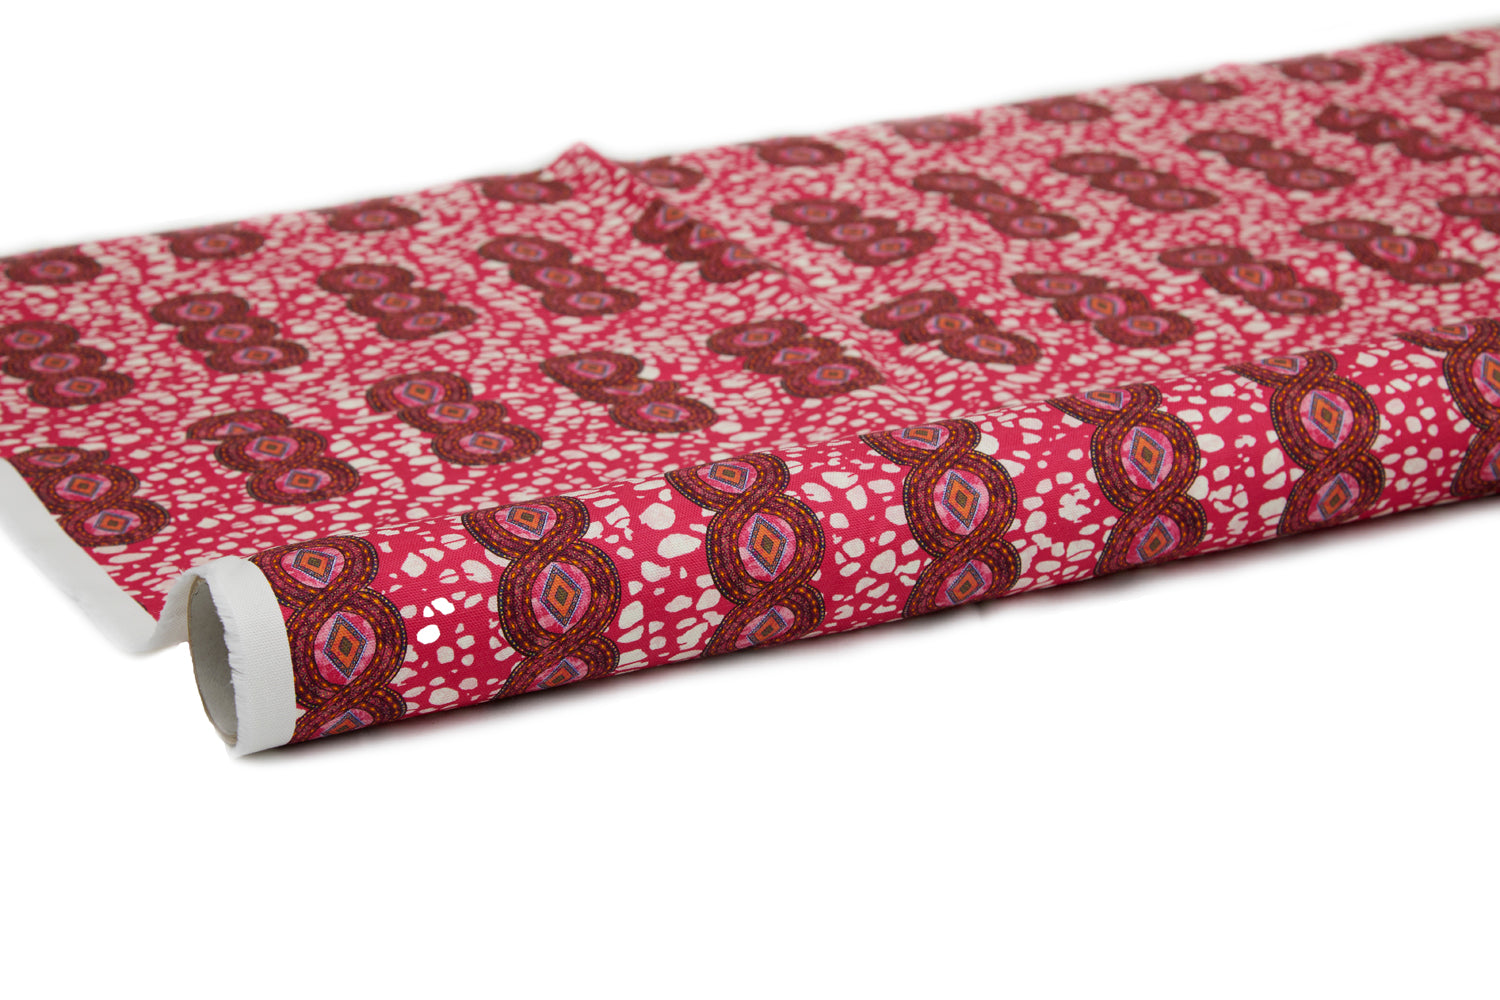 Partially unrolled fabric in an intricate curvilinear print in shades of red, orange and pink.